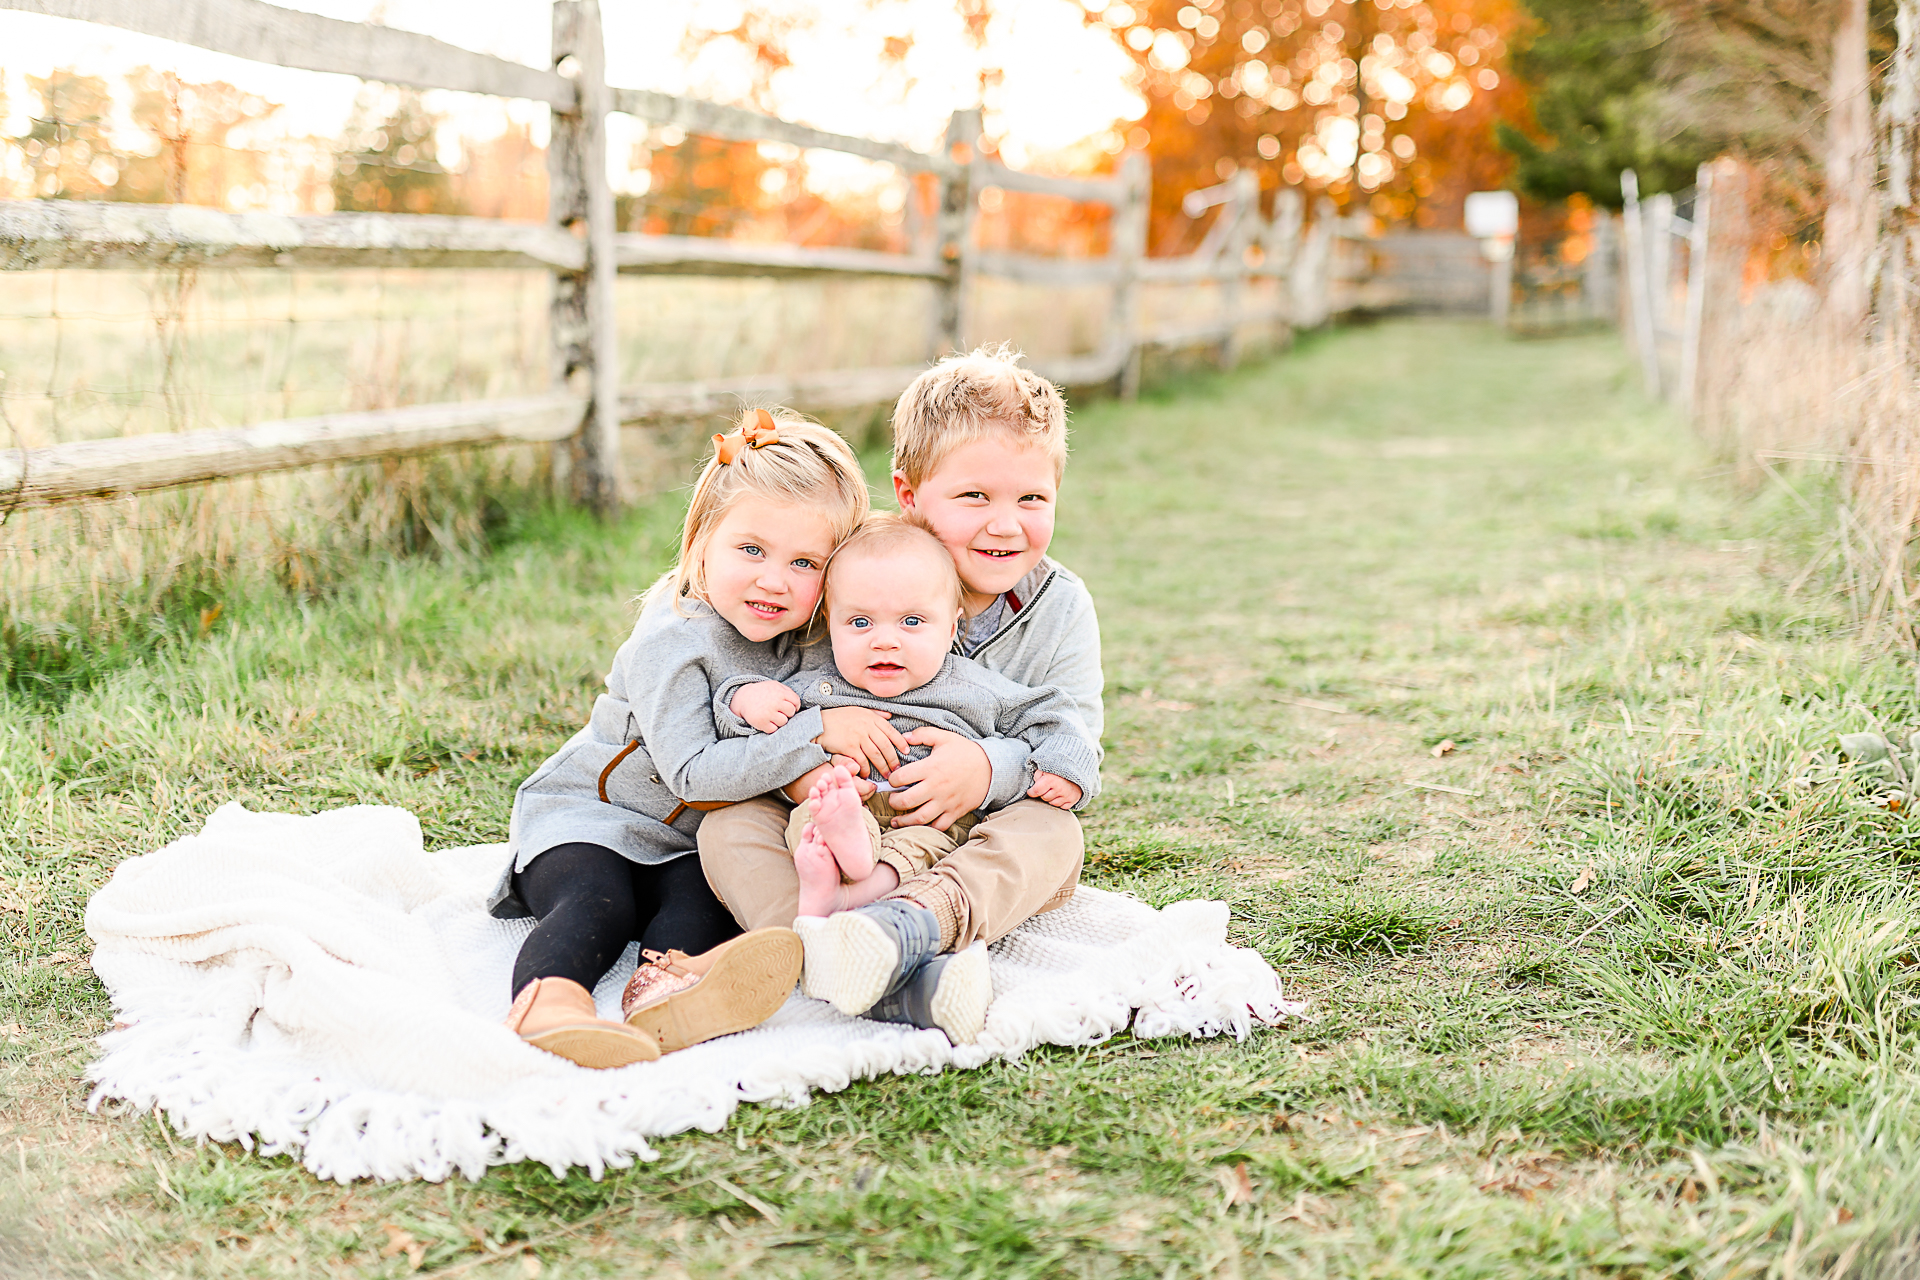 Photo by Norwell Photographer Christina Runnals | A boy, girl, and baby sitting on a white blanket smiling for a picture